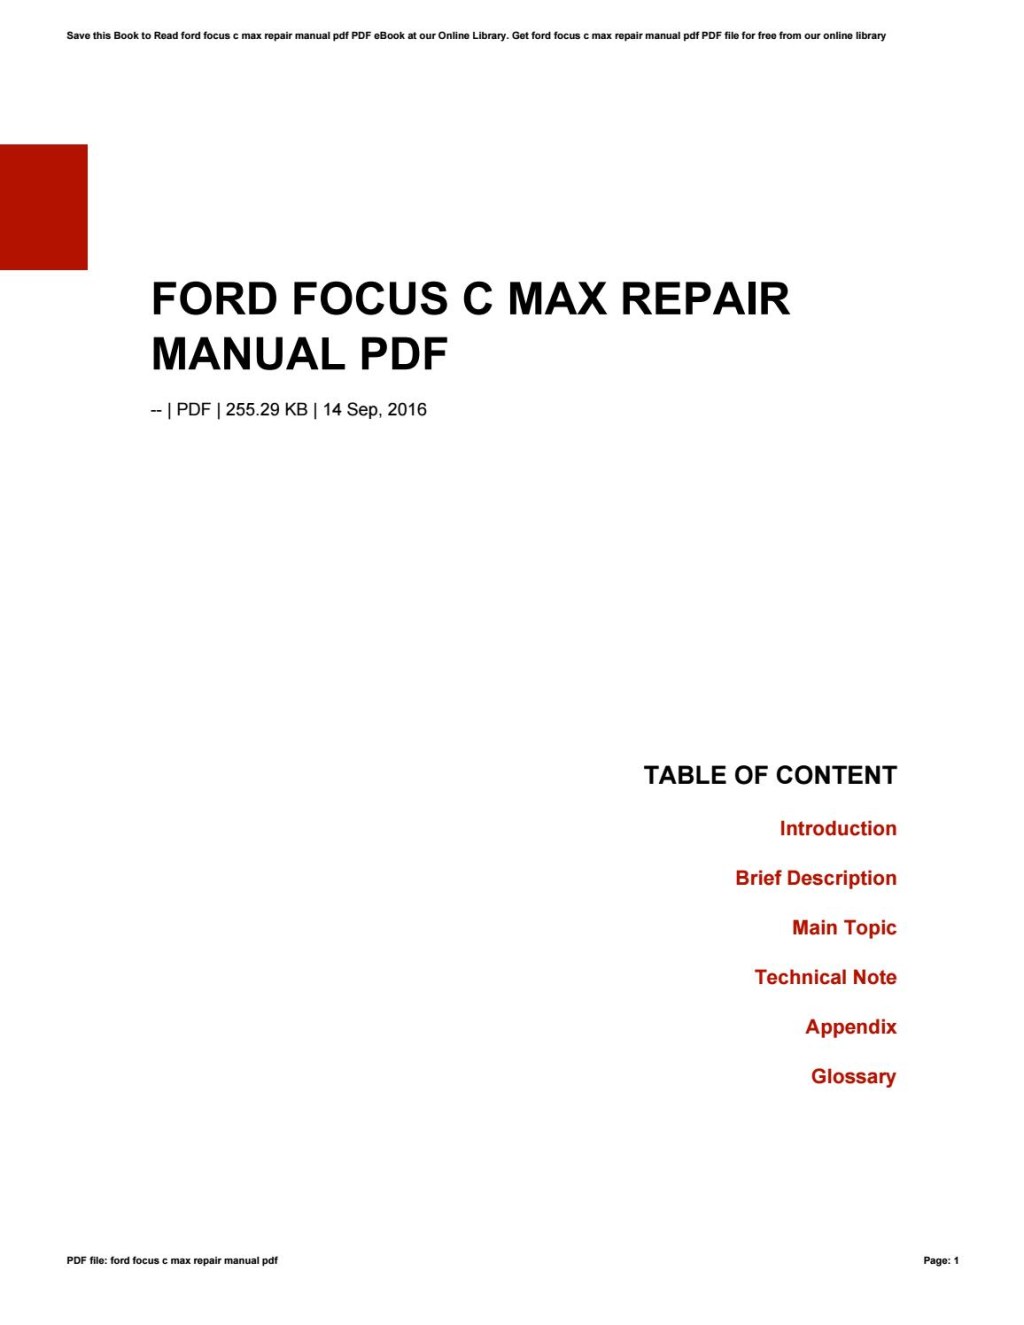 Picture of: Ford focus c max repair manual pdf by ThomasBrown – Issuu